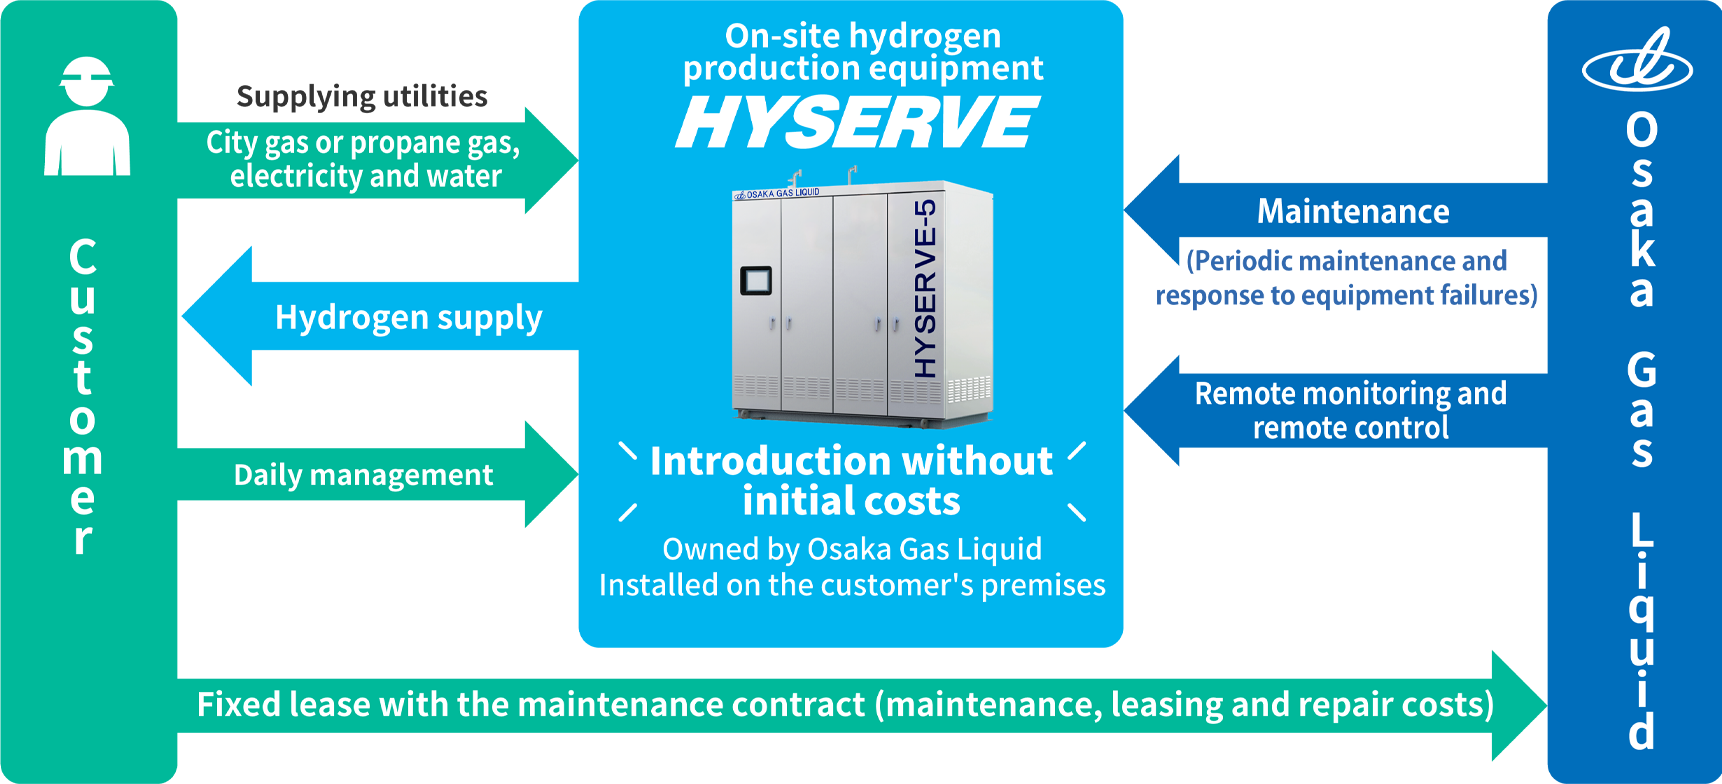 Basic scheme of on-site hydrogen contract